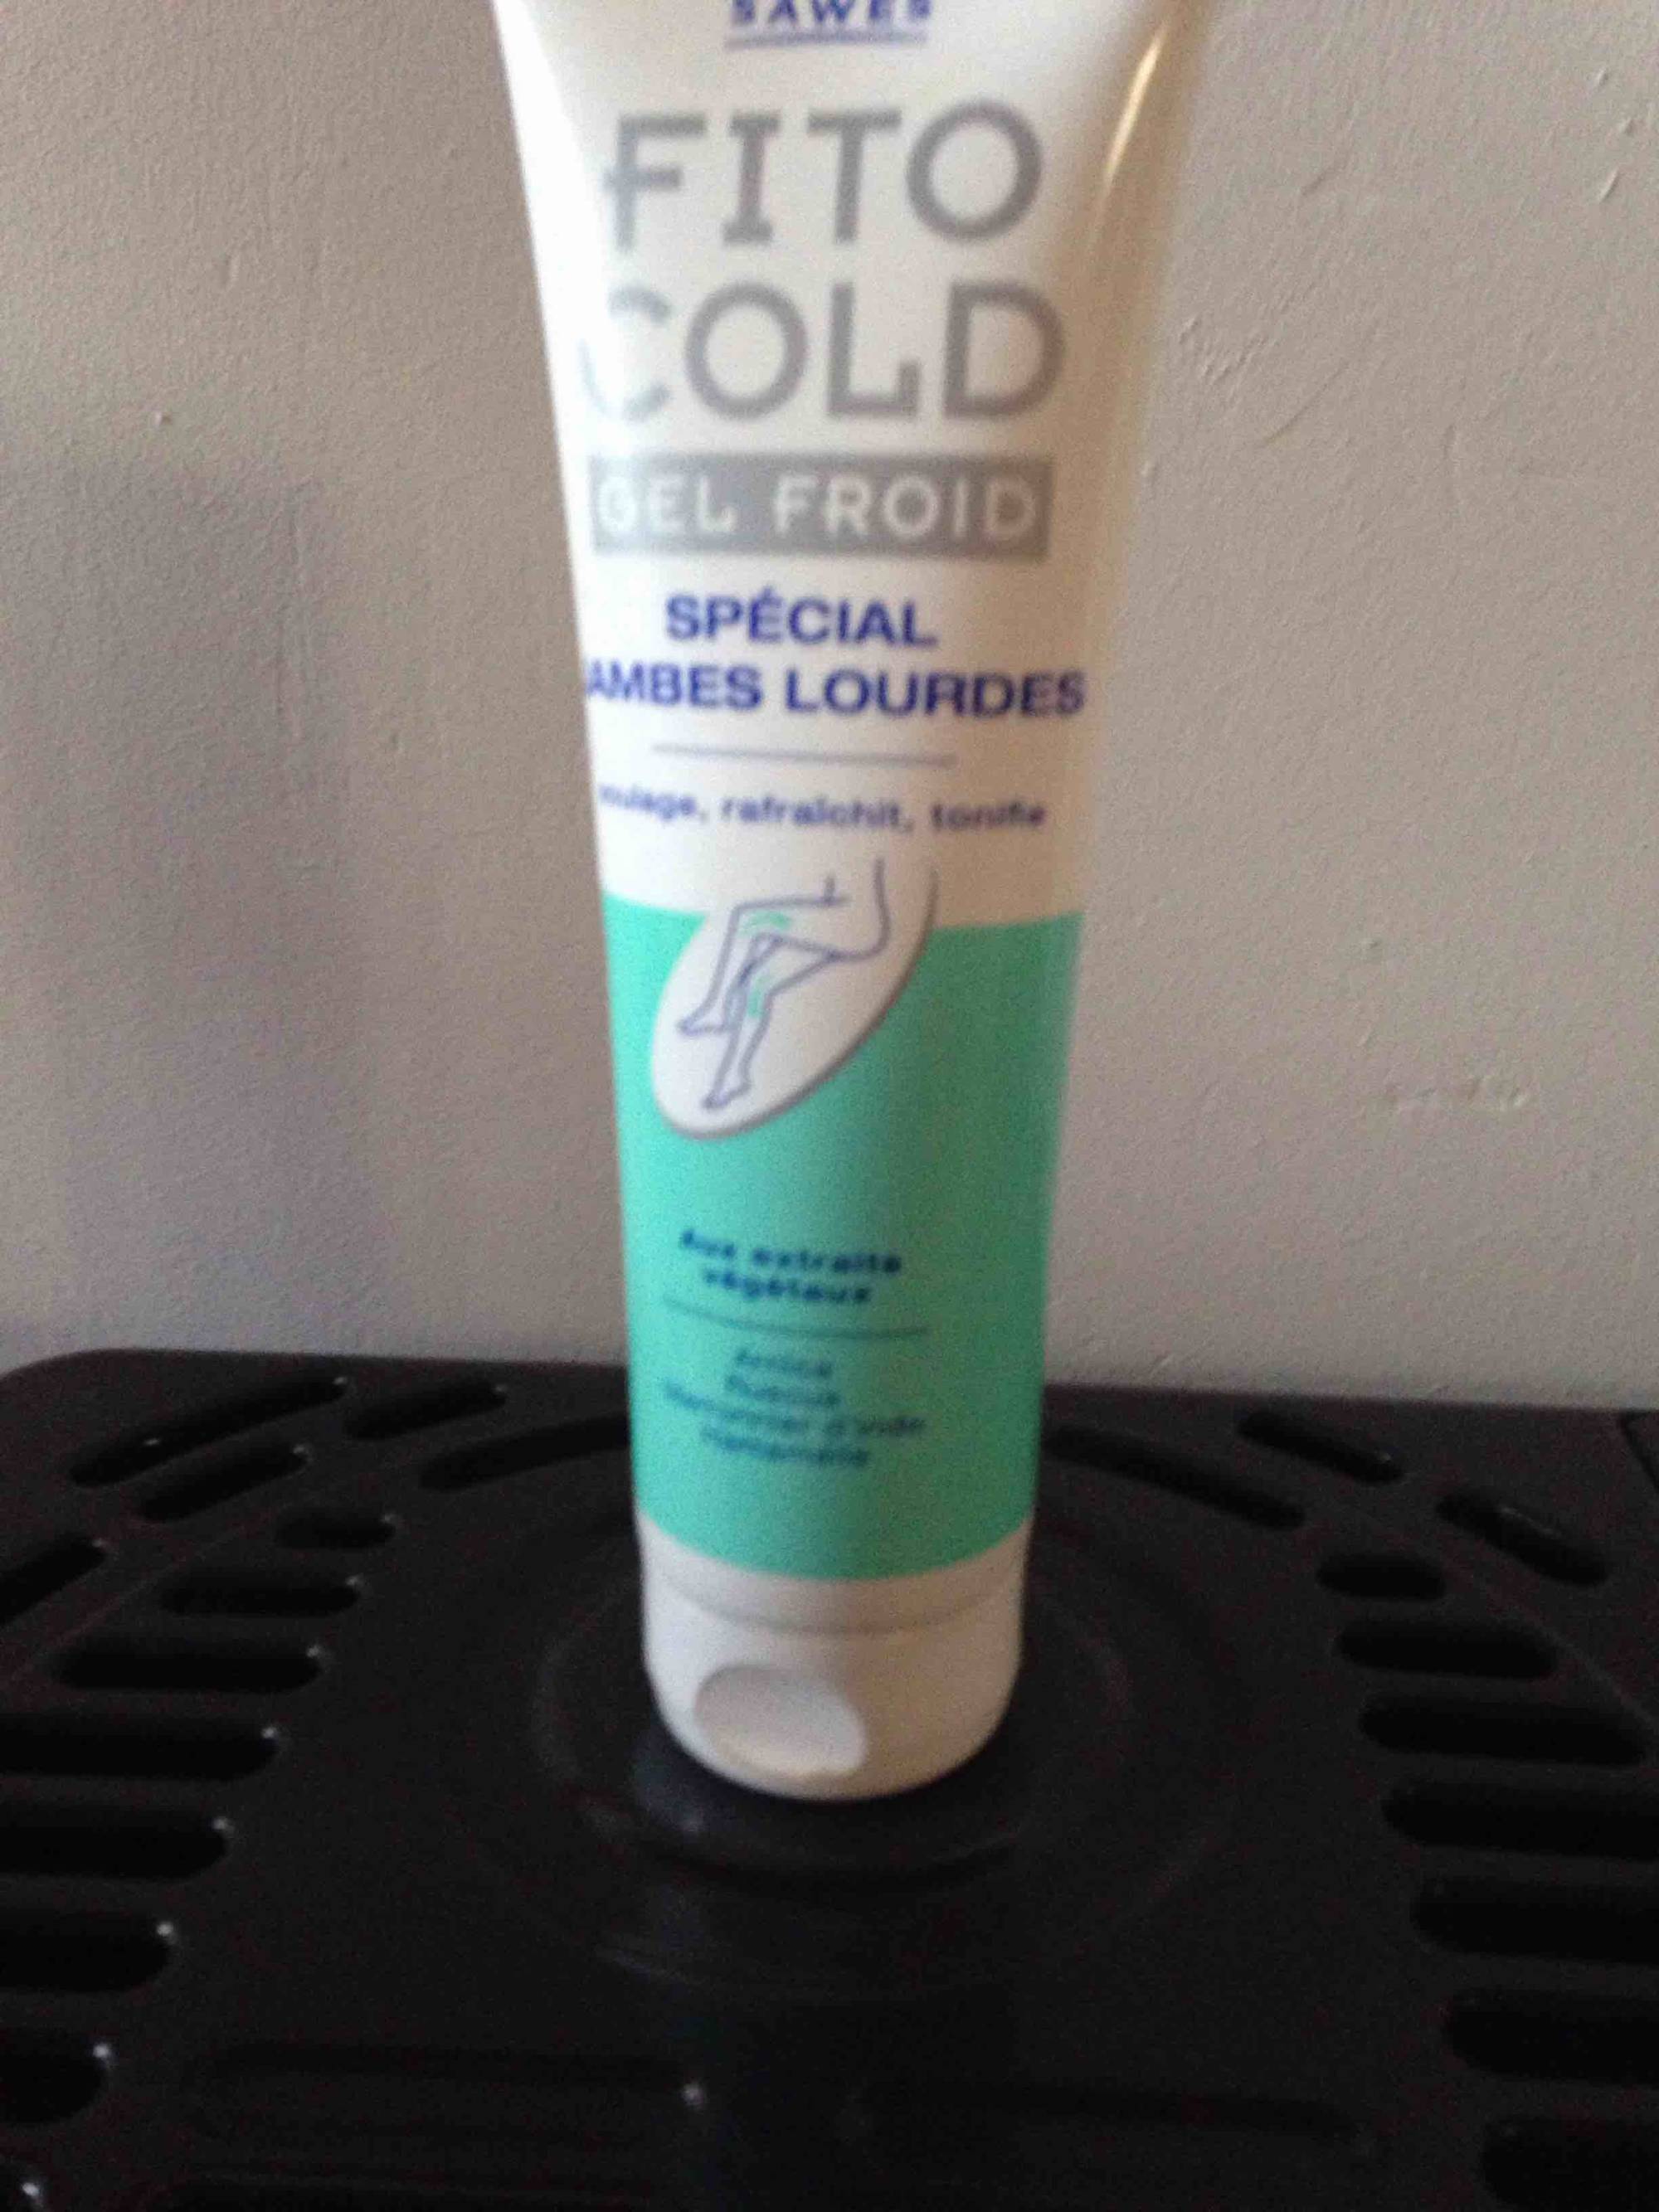 SAWES - Fito cold - Gel froid jambes lourdes